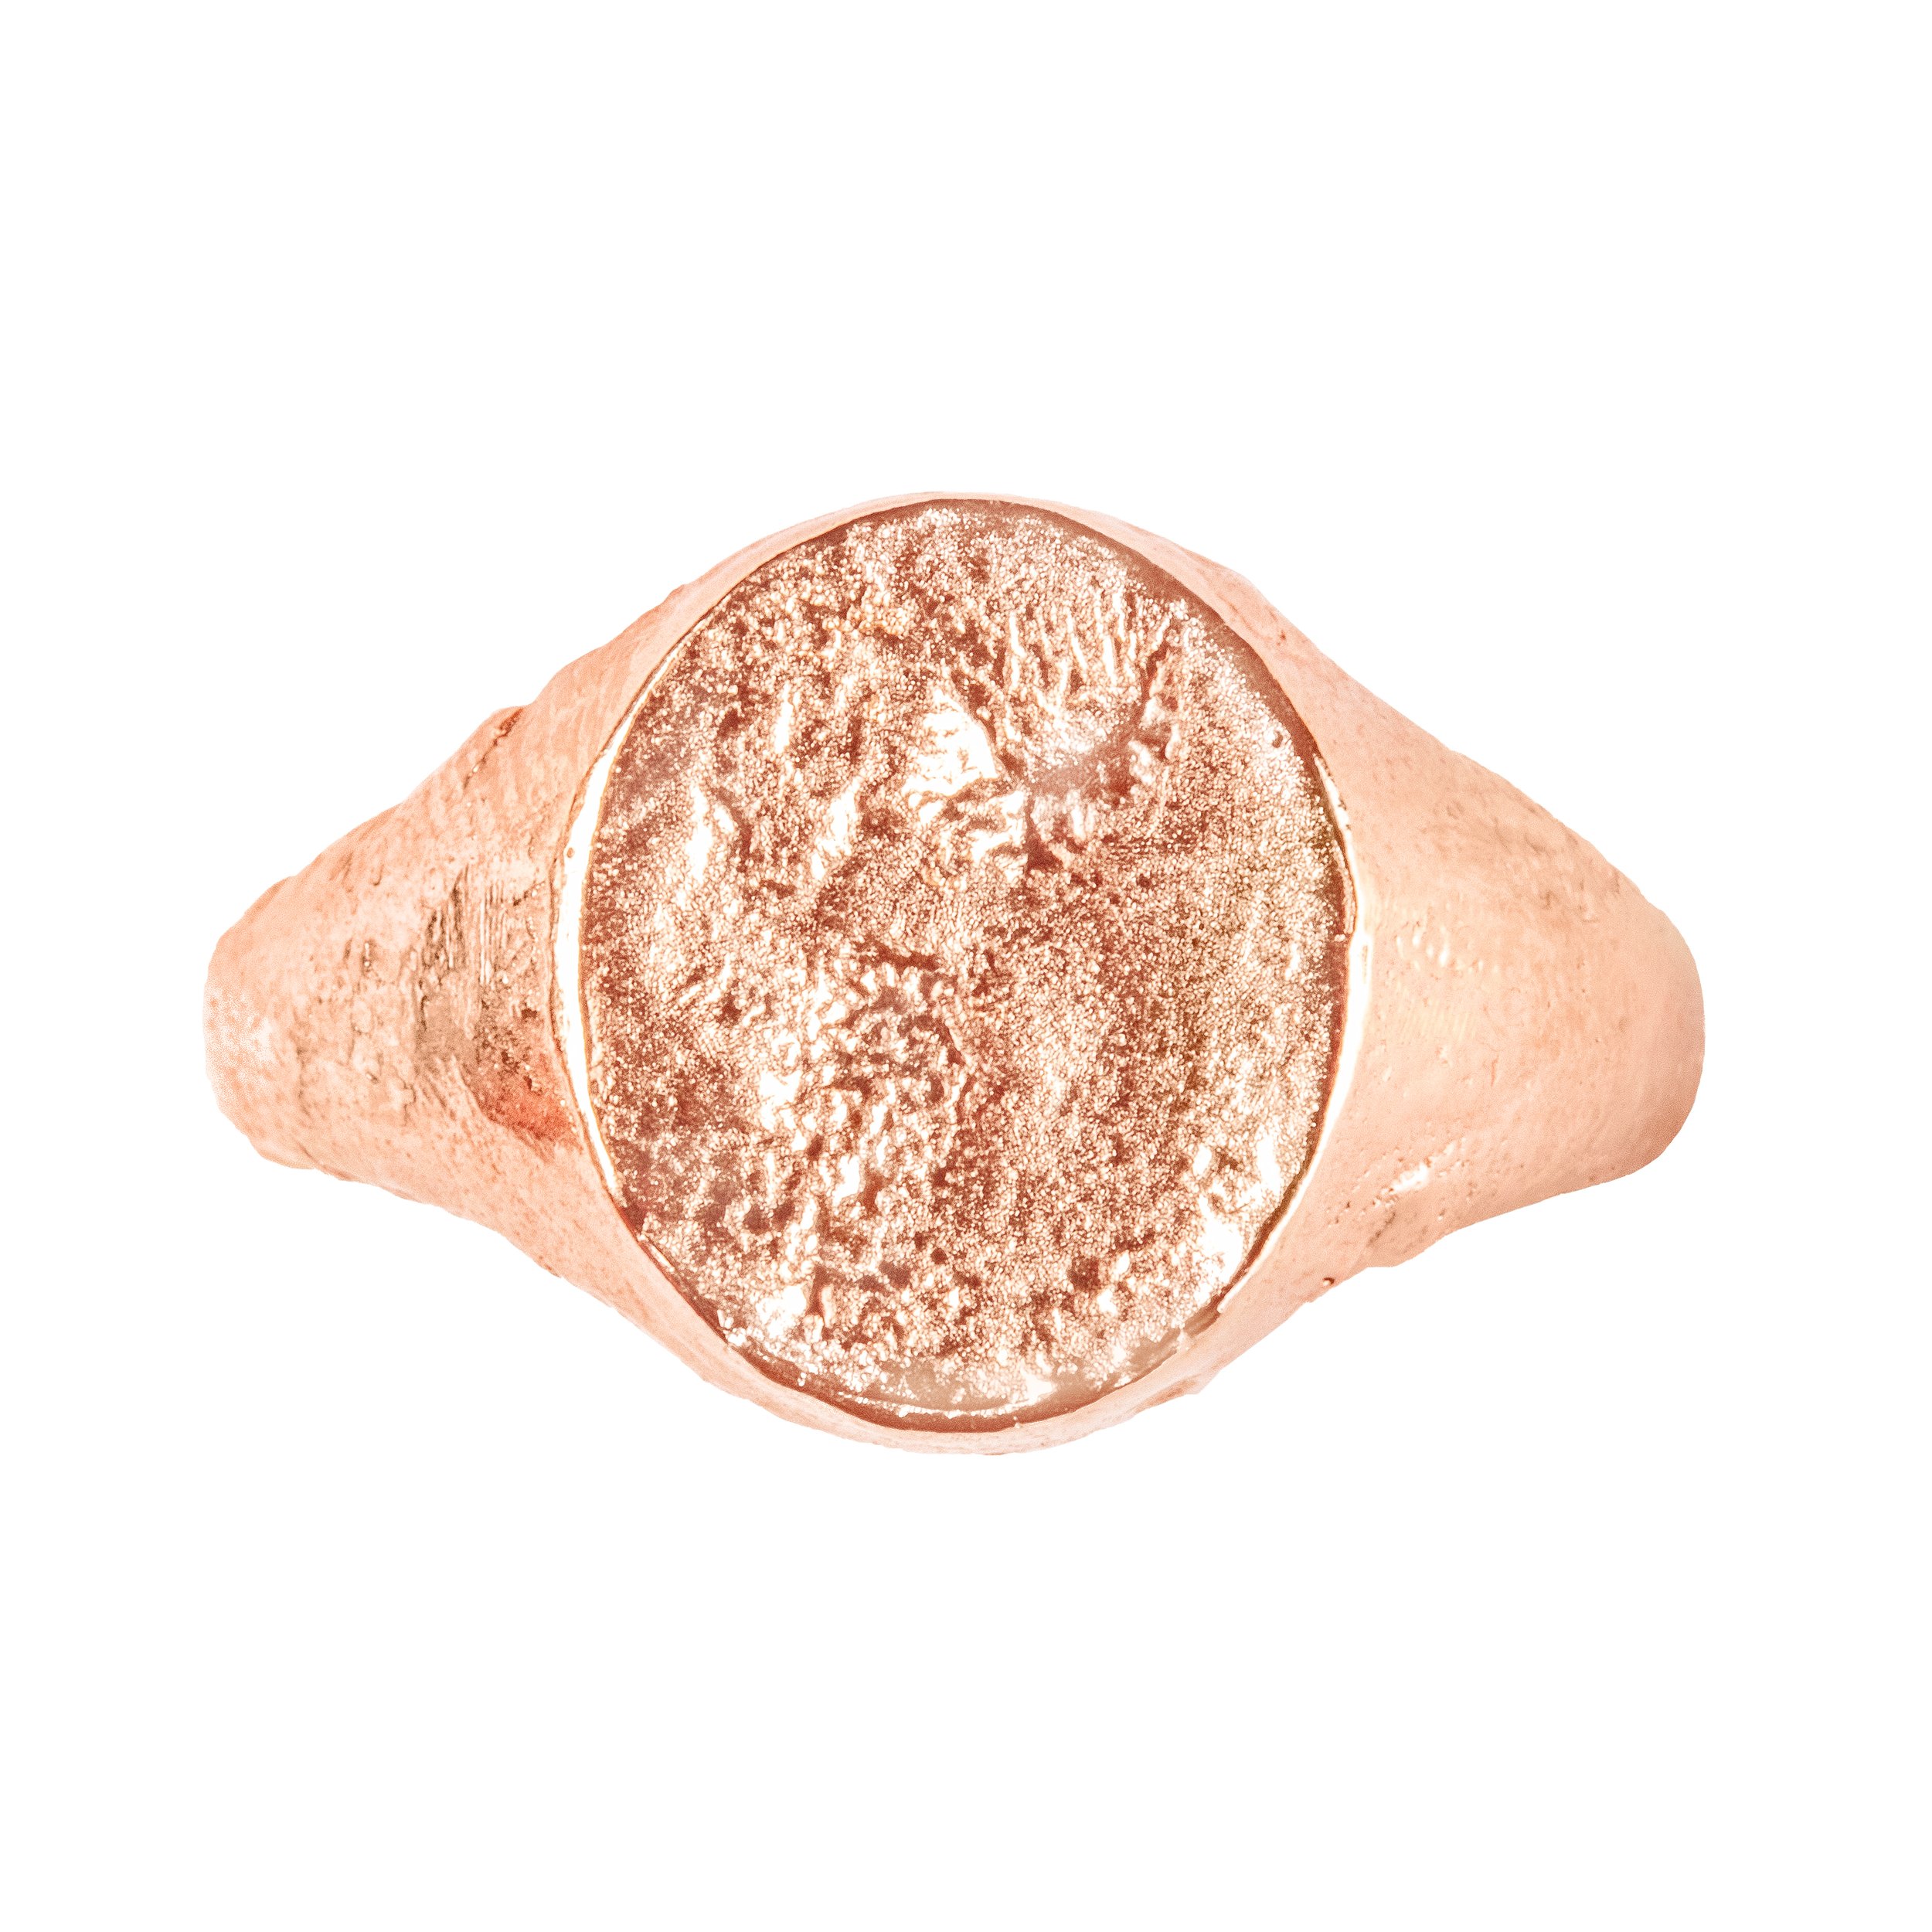 9ct red / rose gold heavy weight signet ring